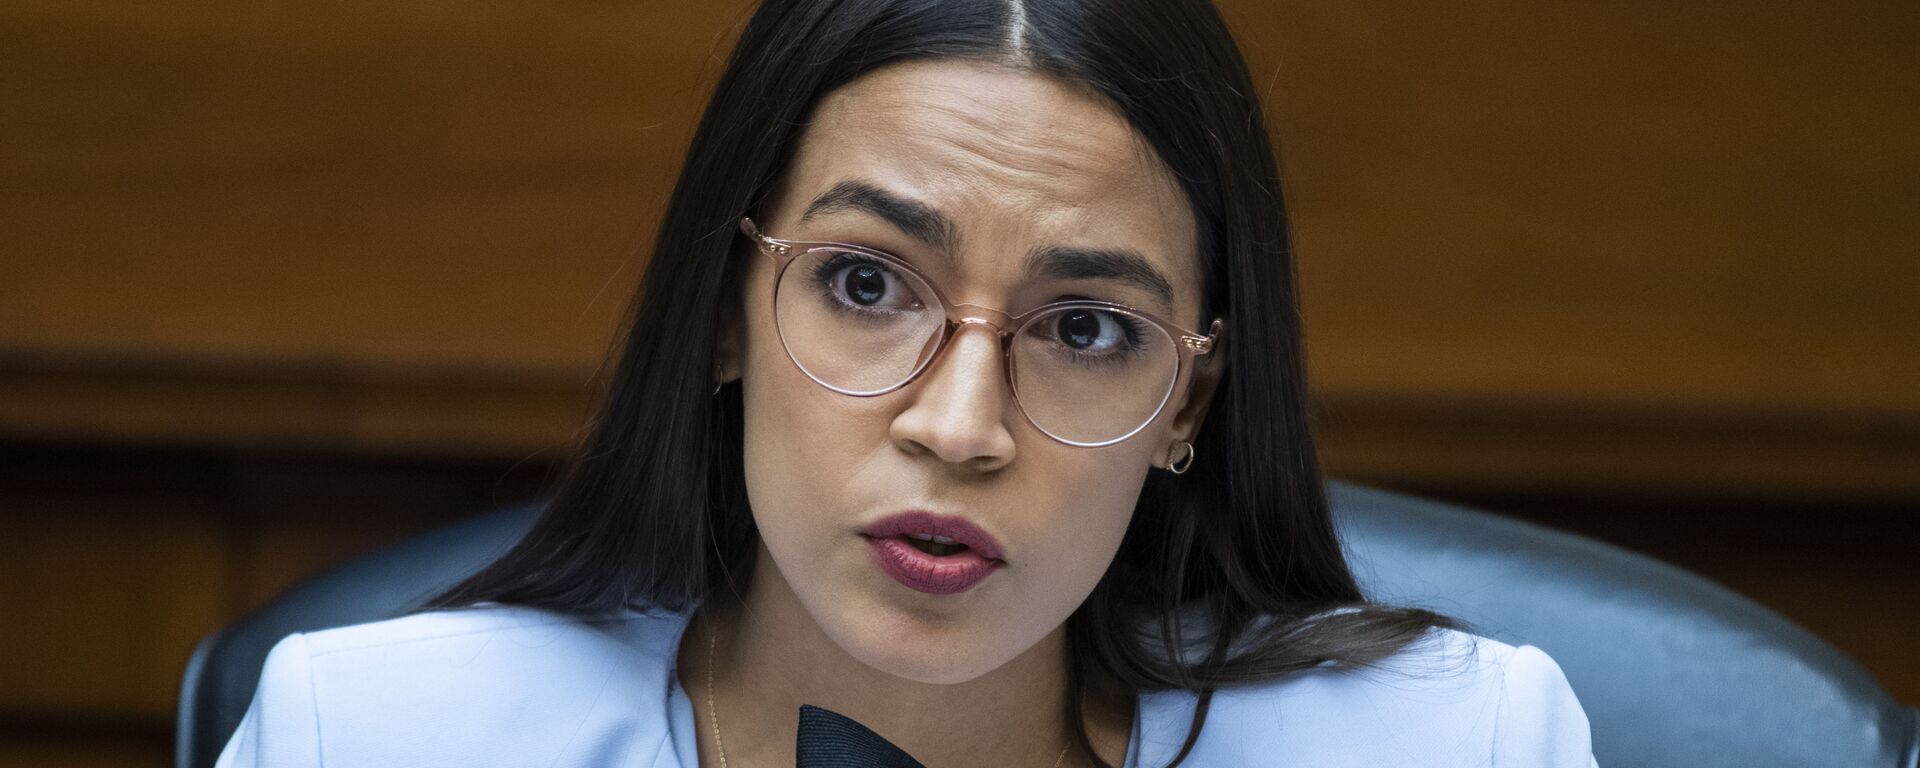 Rep. Alexandria Ocasio-Cortez, D-N.Y., questions Postmaster General Louis DeJoy during a House Oversight and Reform Committee hearing on the Postal Service on Capitol Hill, Monday, Aug. 24, 2020 - Sputnik International, 1920, 31.03.2021